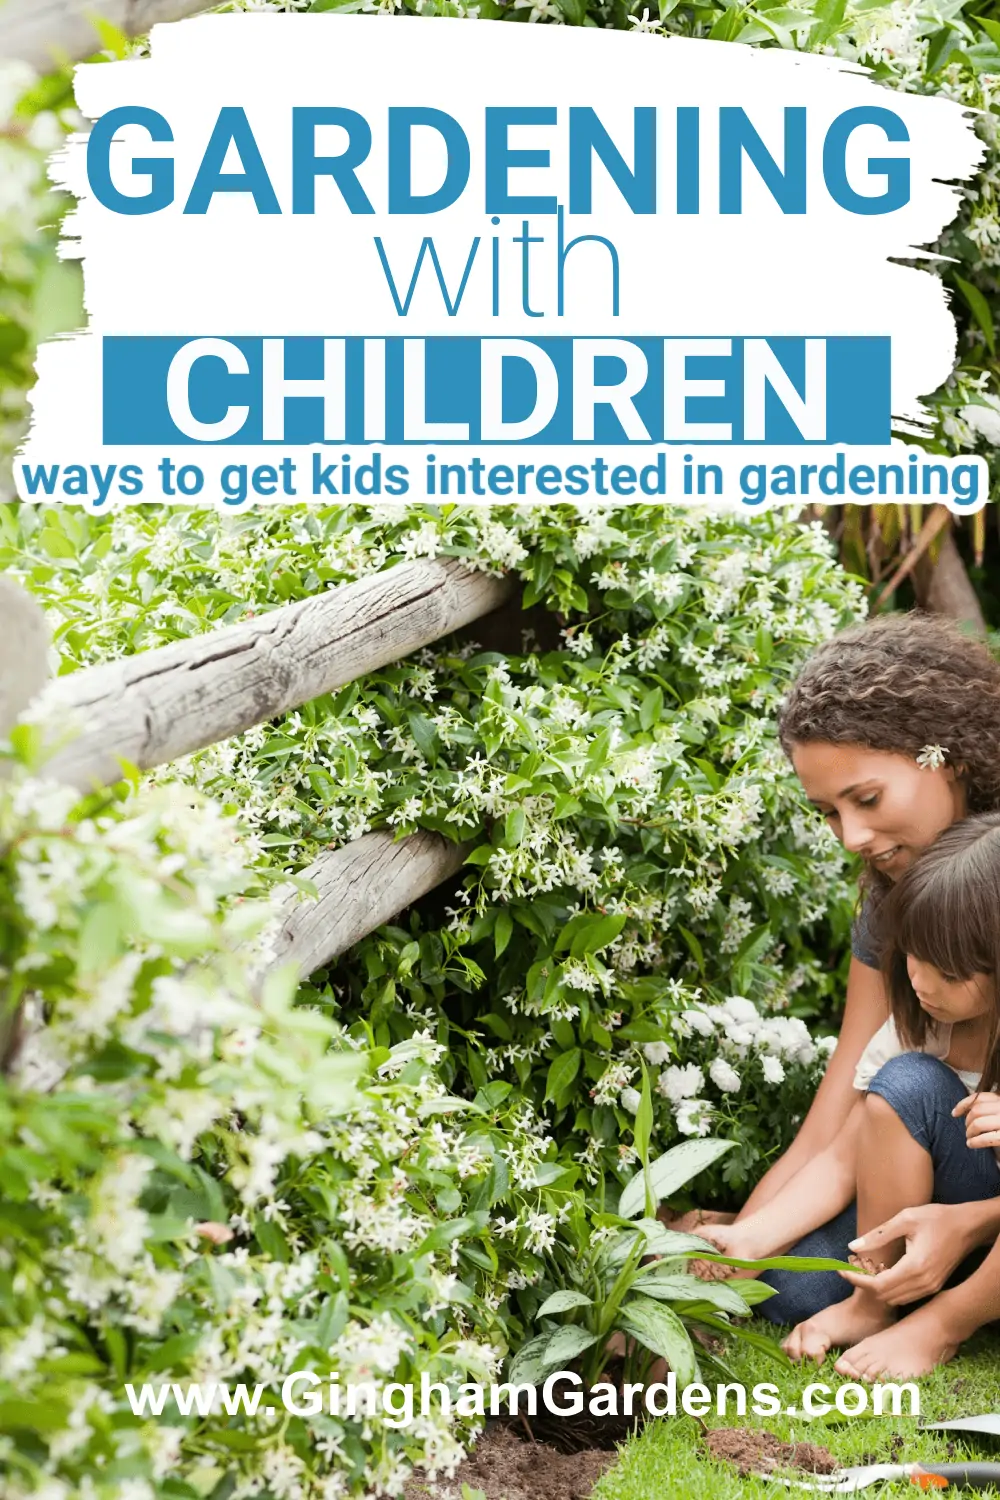 Image of a women and child in a garden with text overlay Gardening with Children